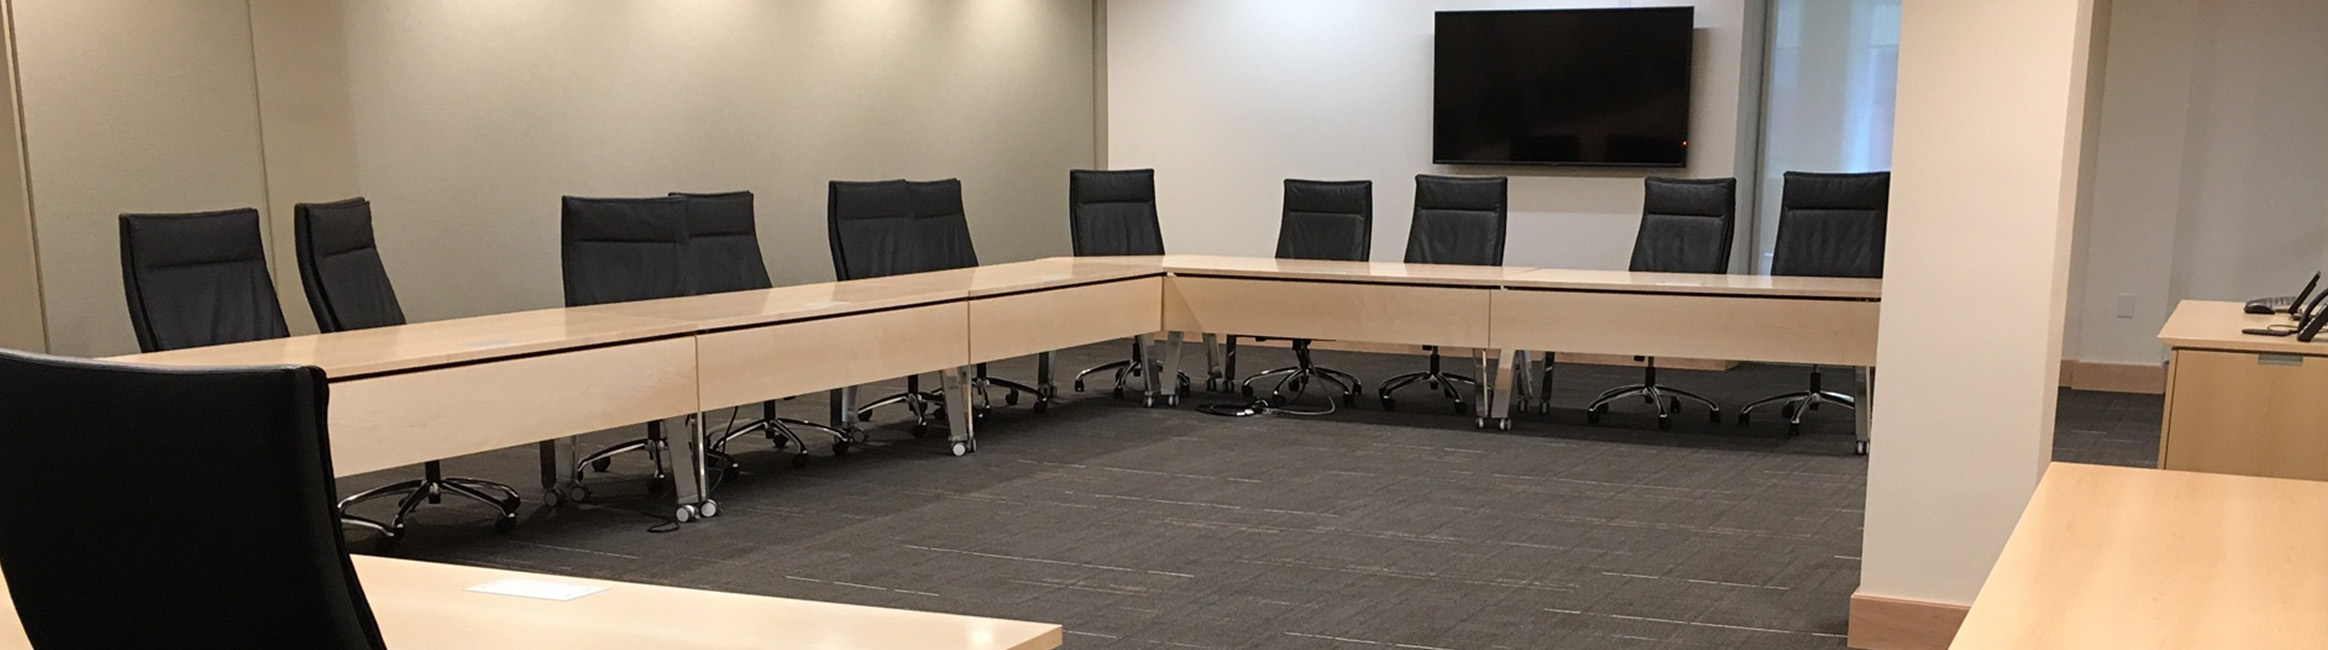 Photo of the board room in Cabell Library